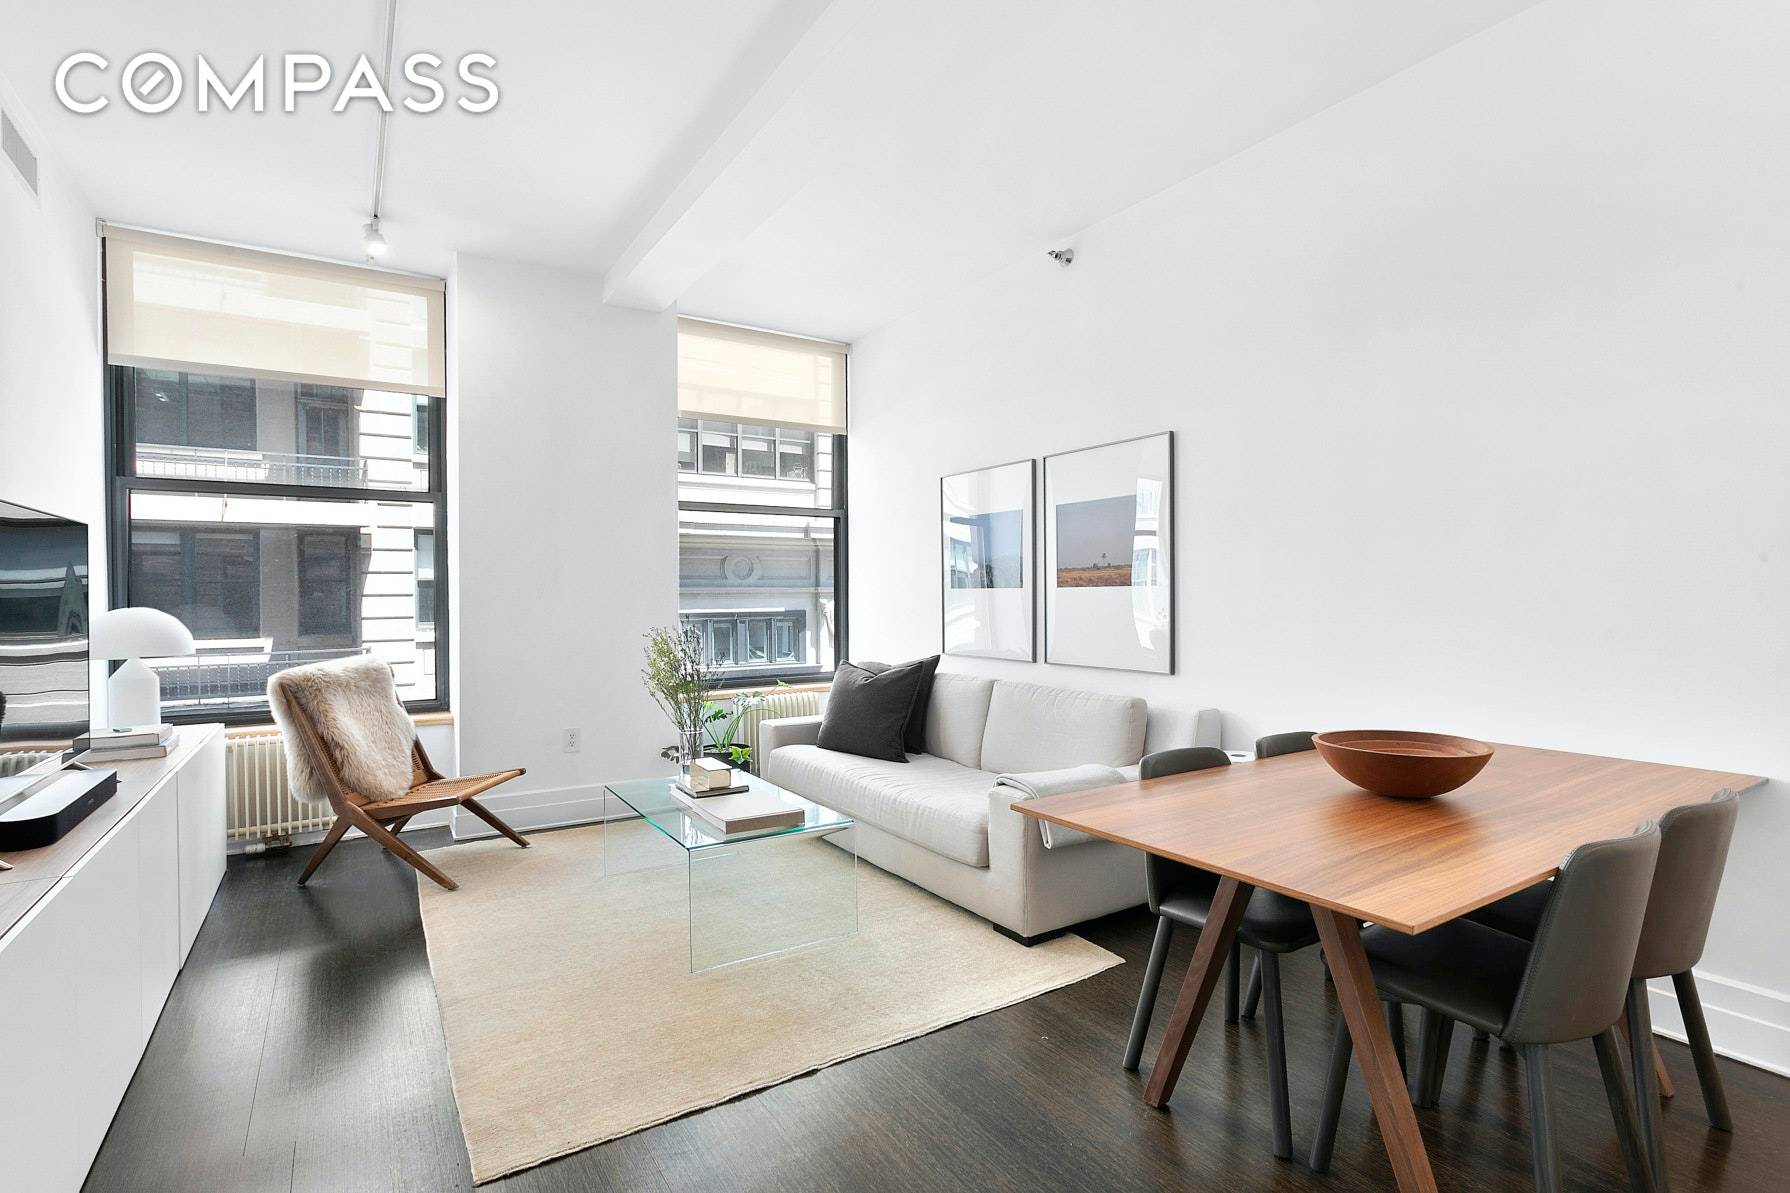 This exceptional one bedroom loft will captivate you with its soaring 11 foot ceilings and chic design.